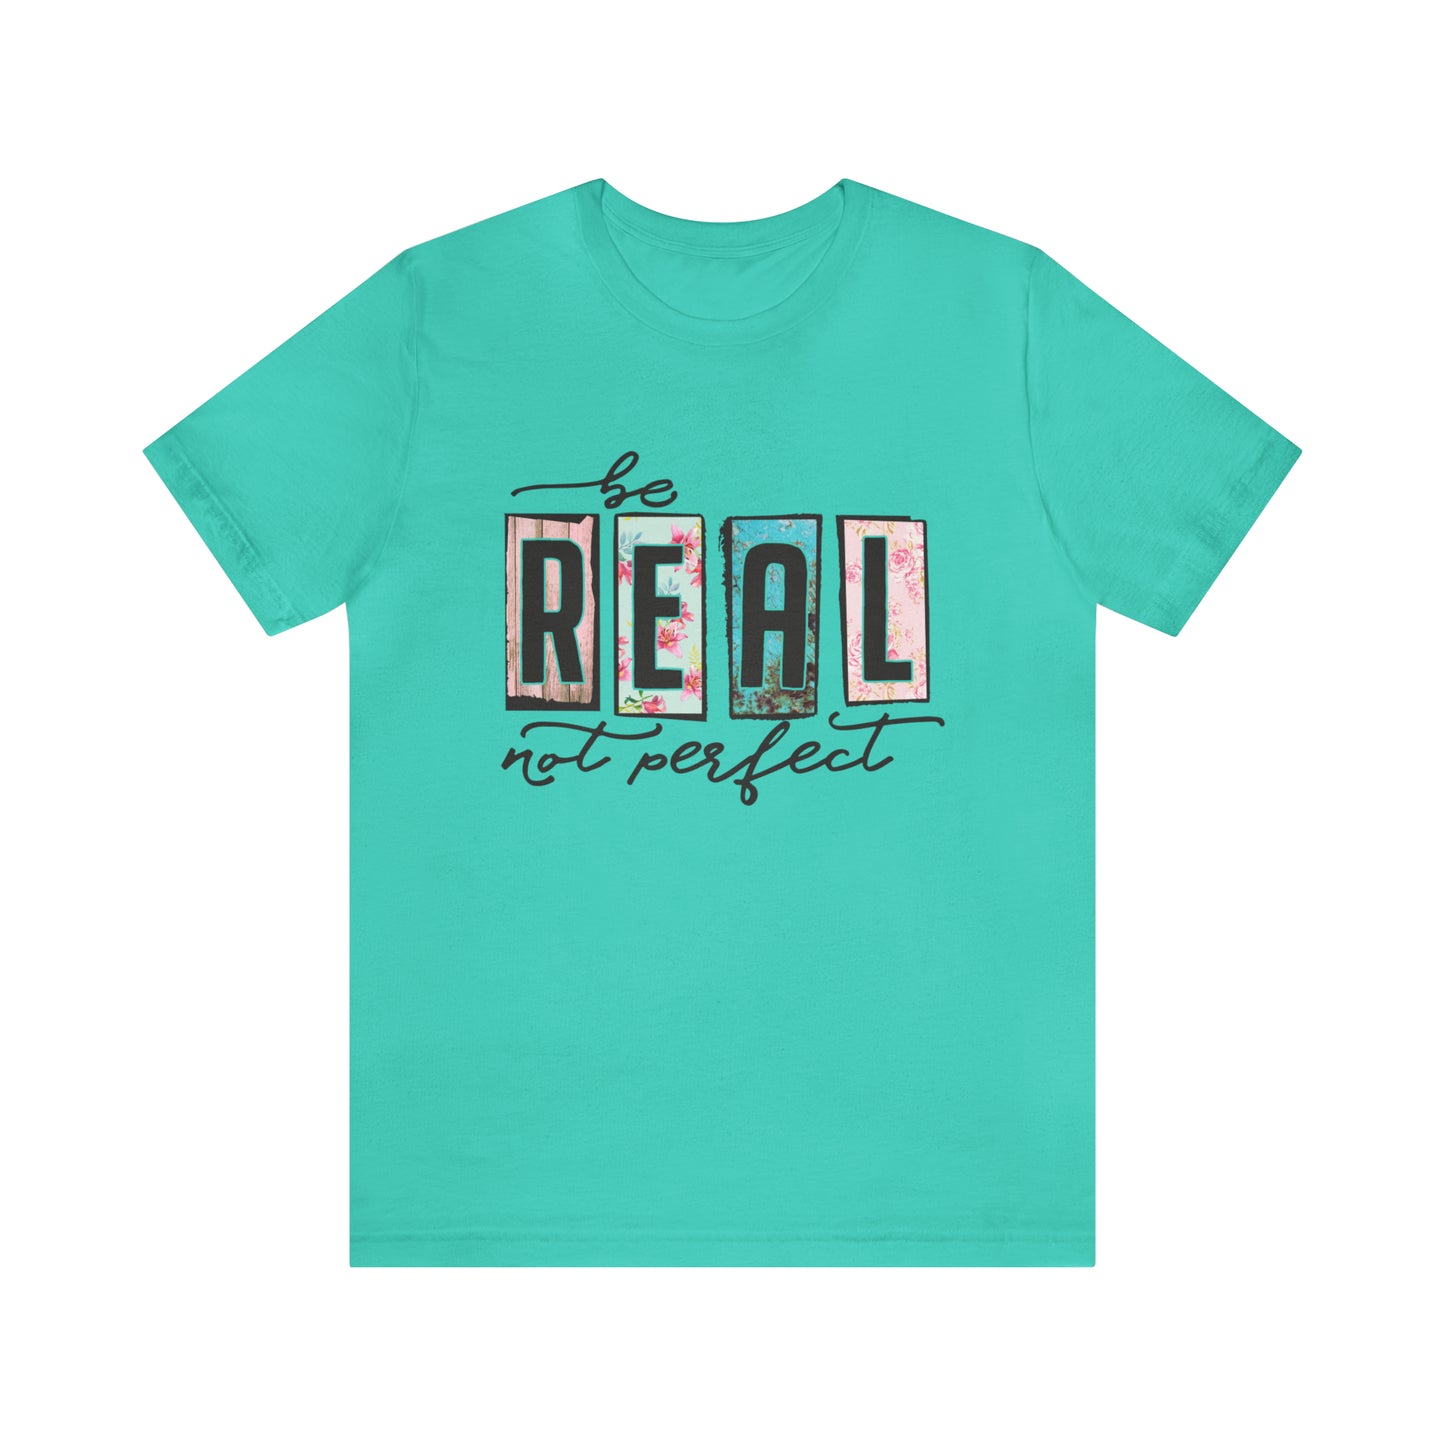 Be real not perfect Short Sleeve Women's Tee